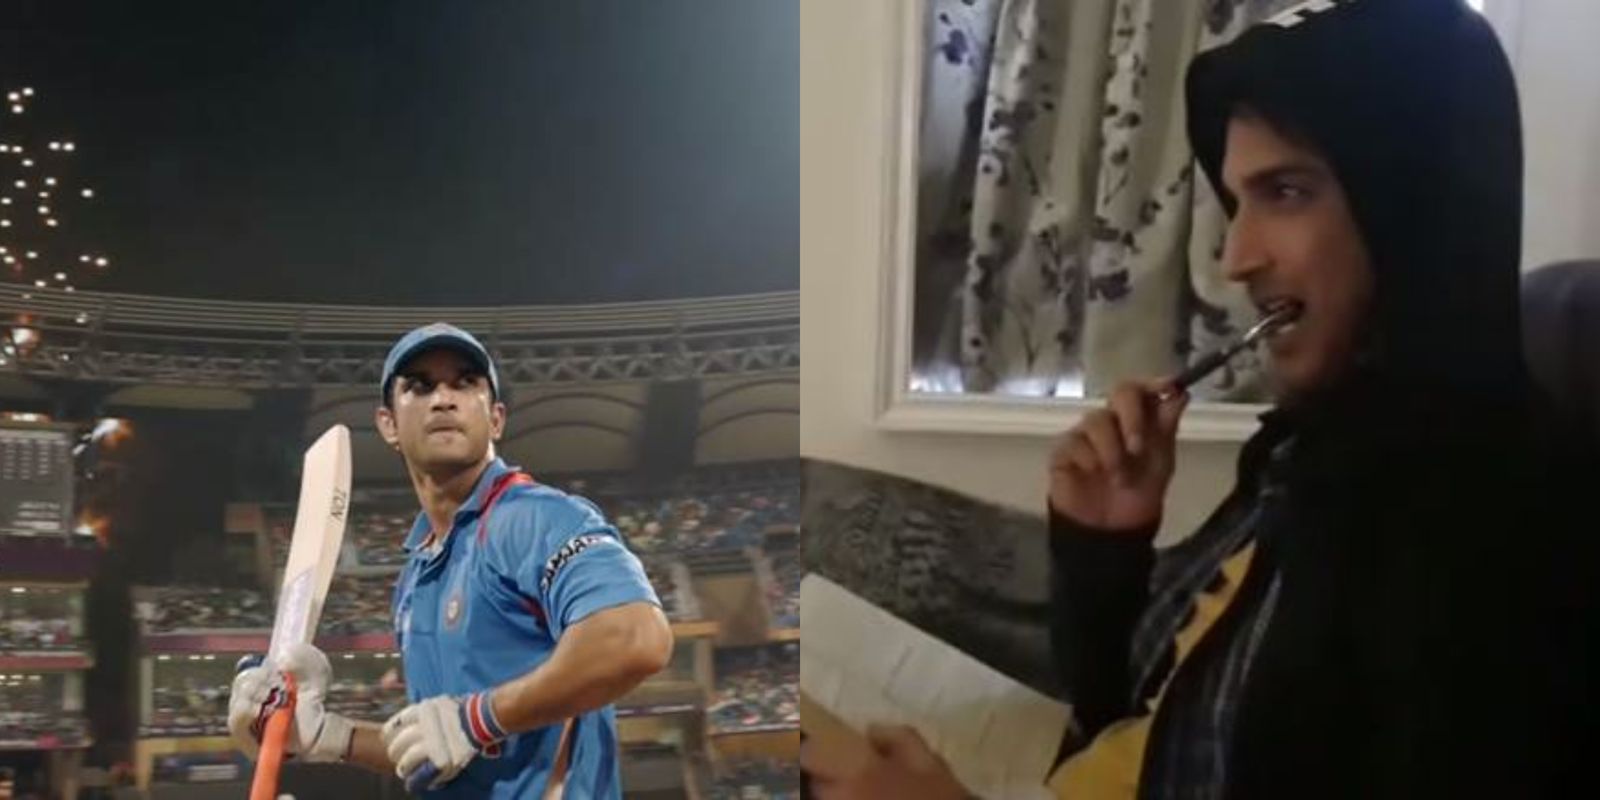 Sushant Singh Rajput Watches Himself As M.S. Dhoni On TV In This Old Video, Seen As Captivated As Any Fan During The Climax